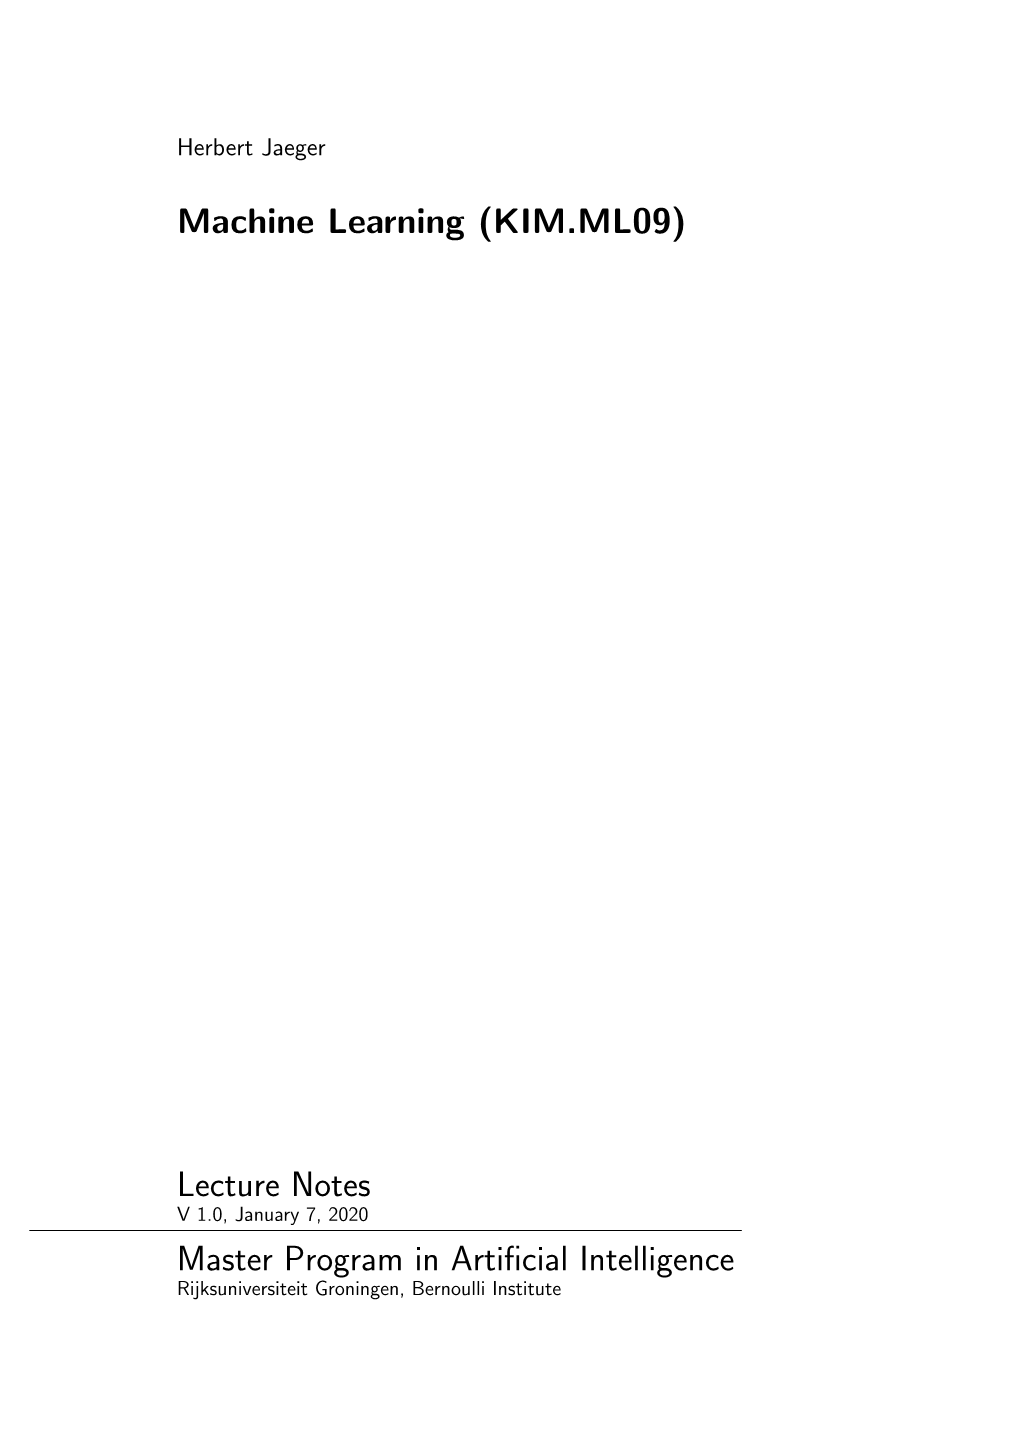 Machine Learning (KIM.ML09) Lecture Notes Master Program in Artificial